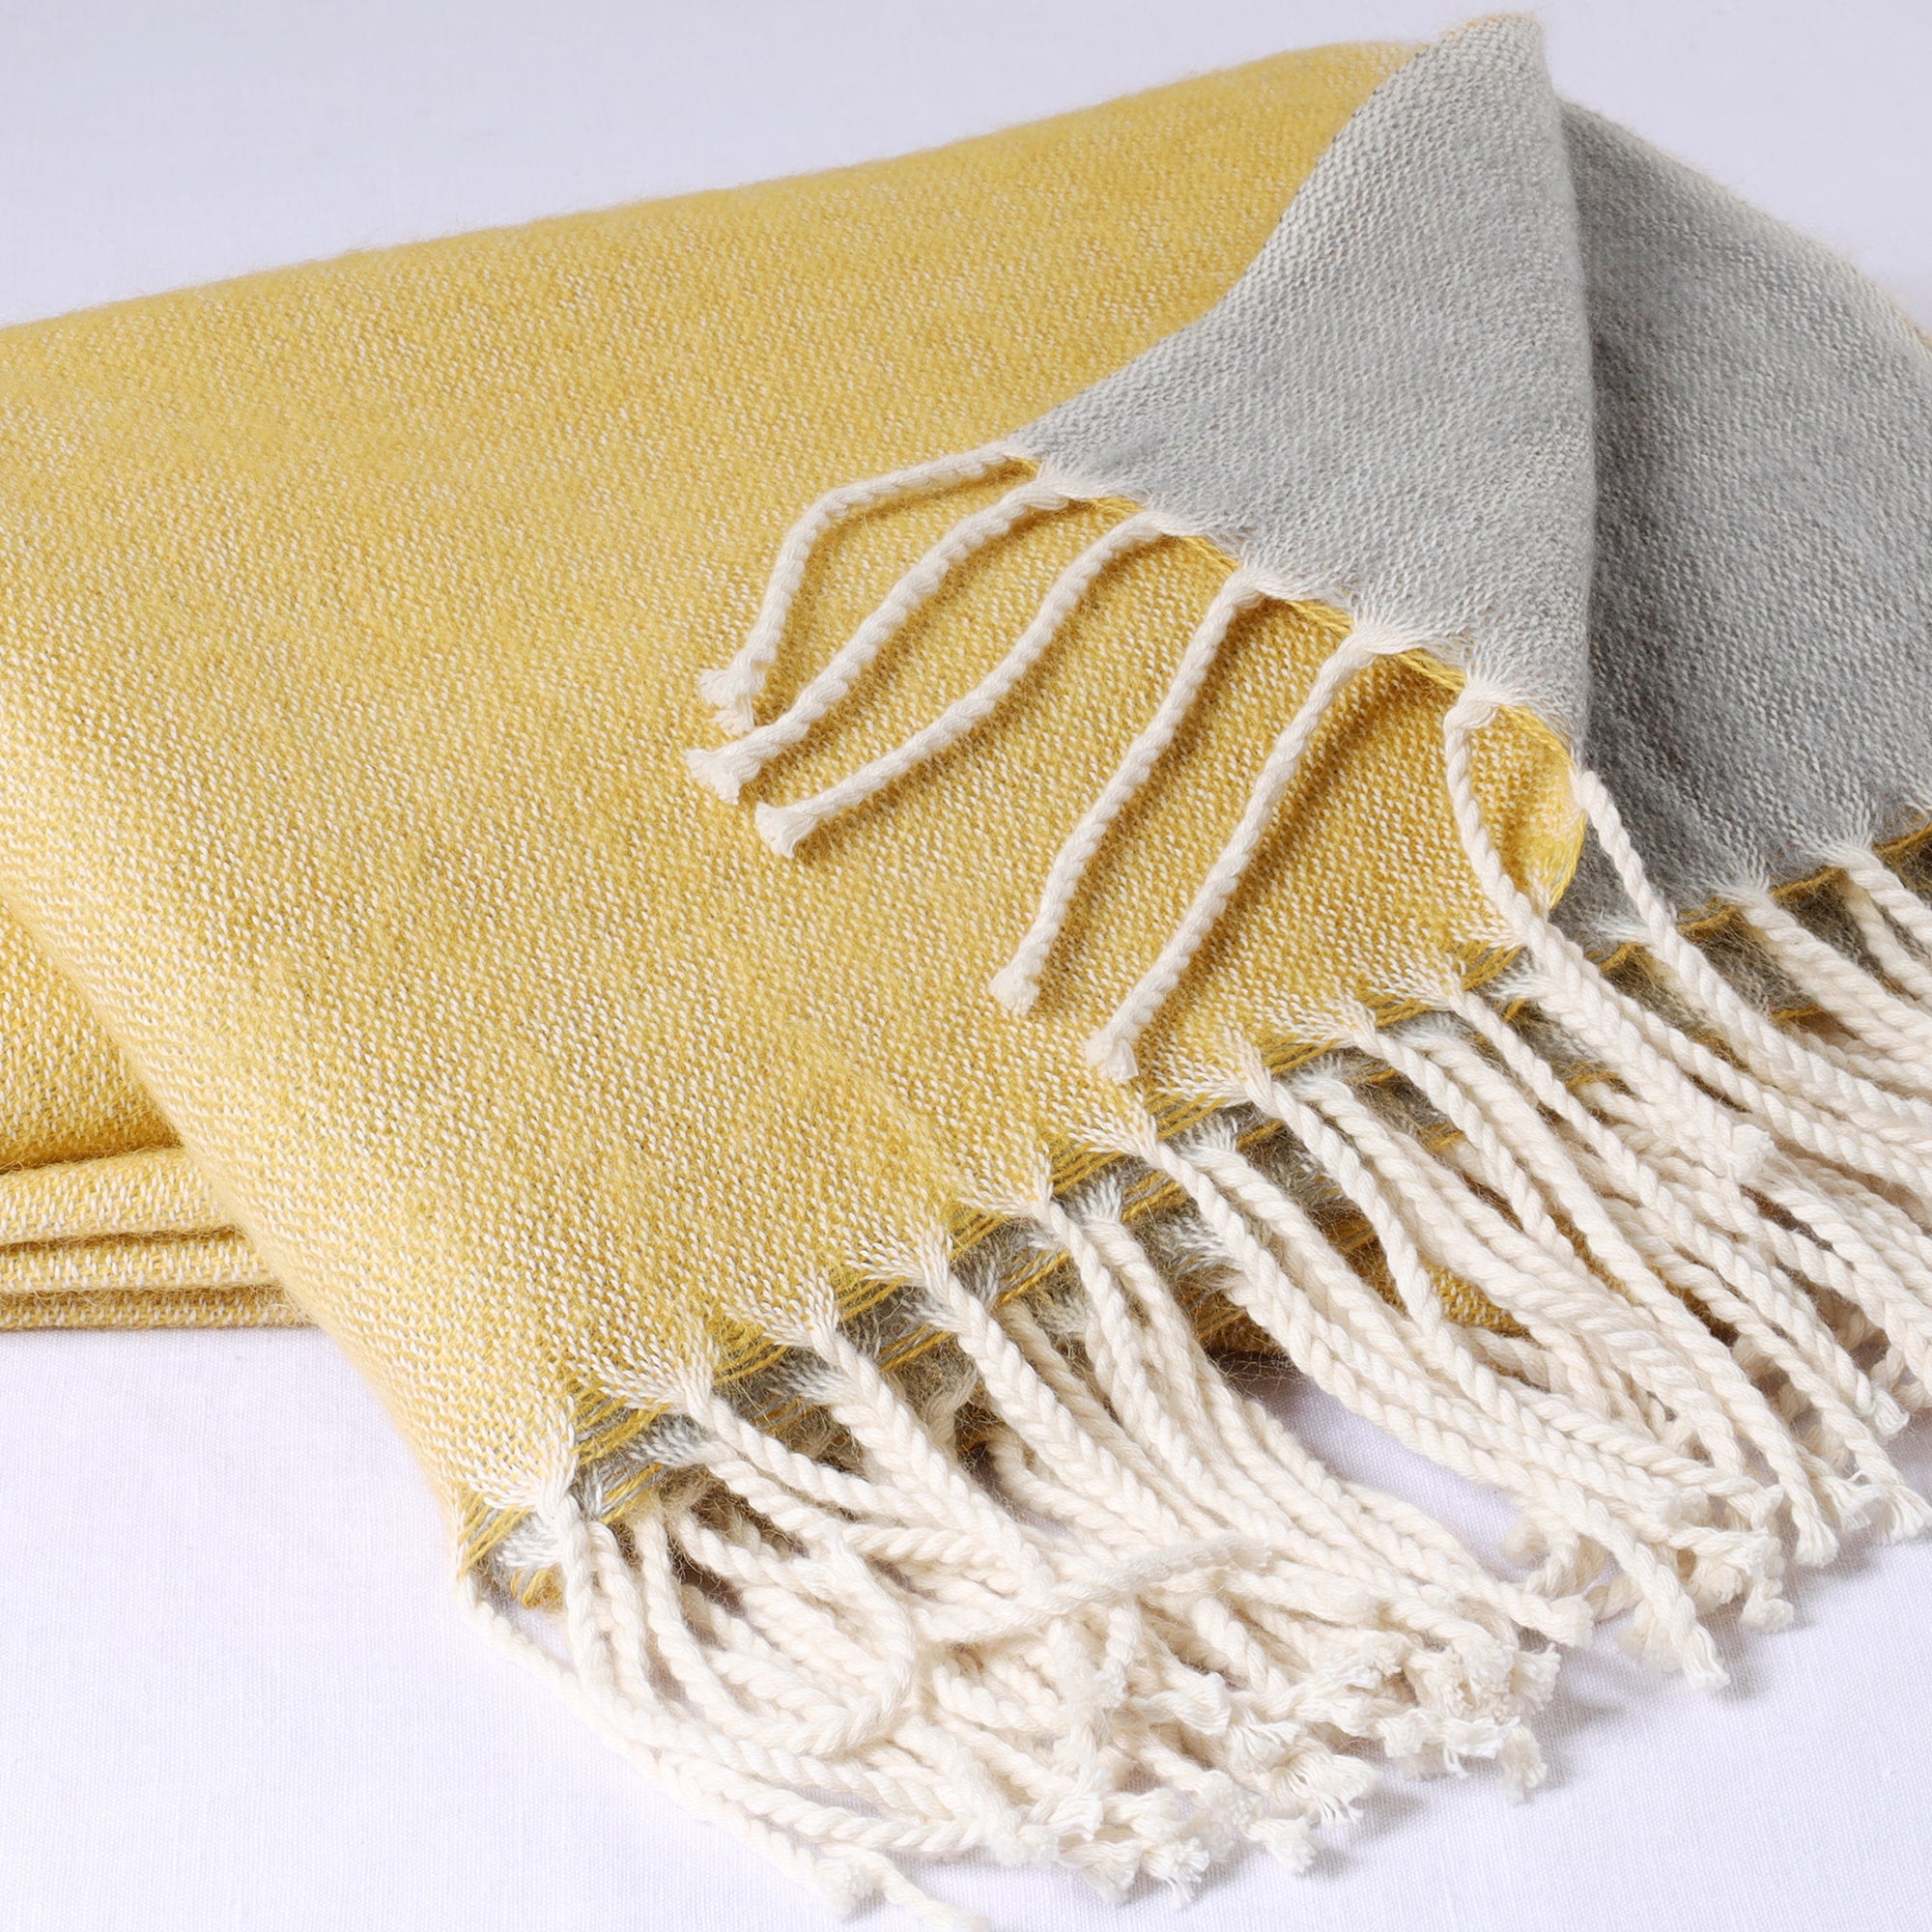 folded brushed reversible mustard and grey throw on white background showing the weave and twisted fringe detail